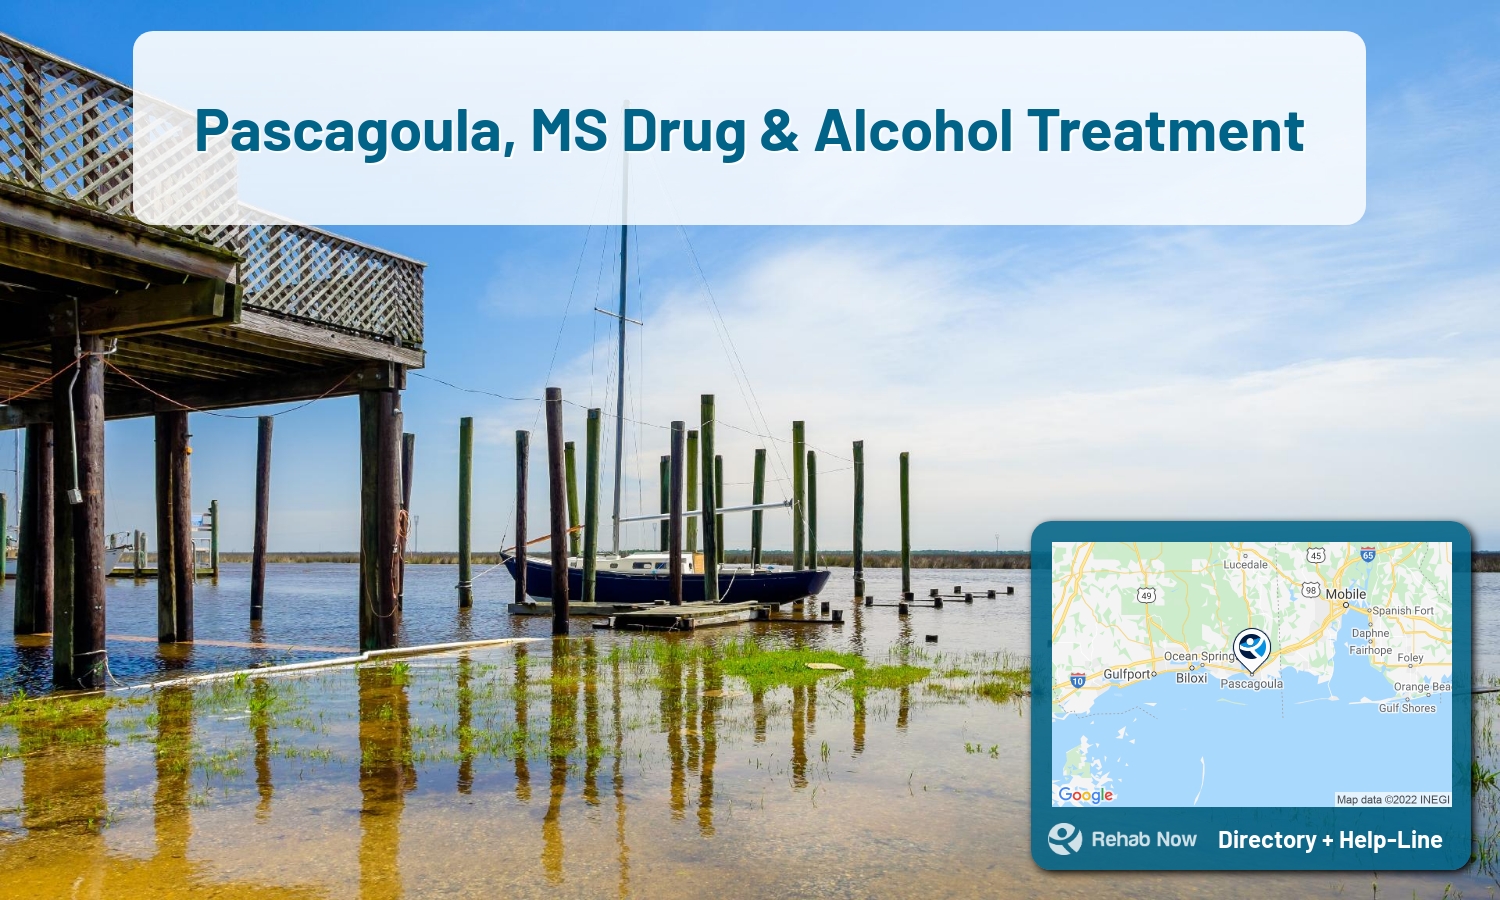 Pascagoula, MS Treatment Centers. Find drug rehab in Pascagoula, Mississippi, or detox and treatment programs. Get the right help now!